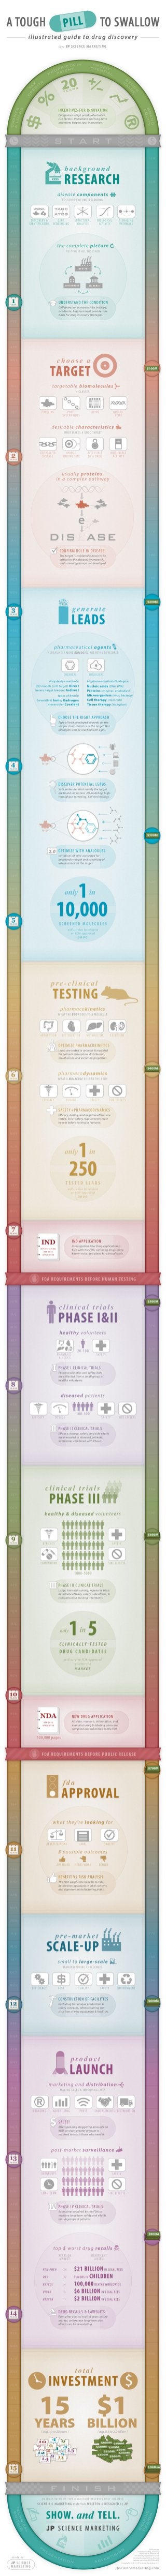 The Drug Discovery Infographic